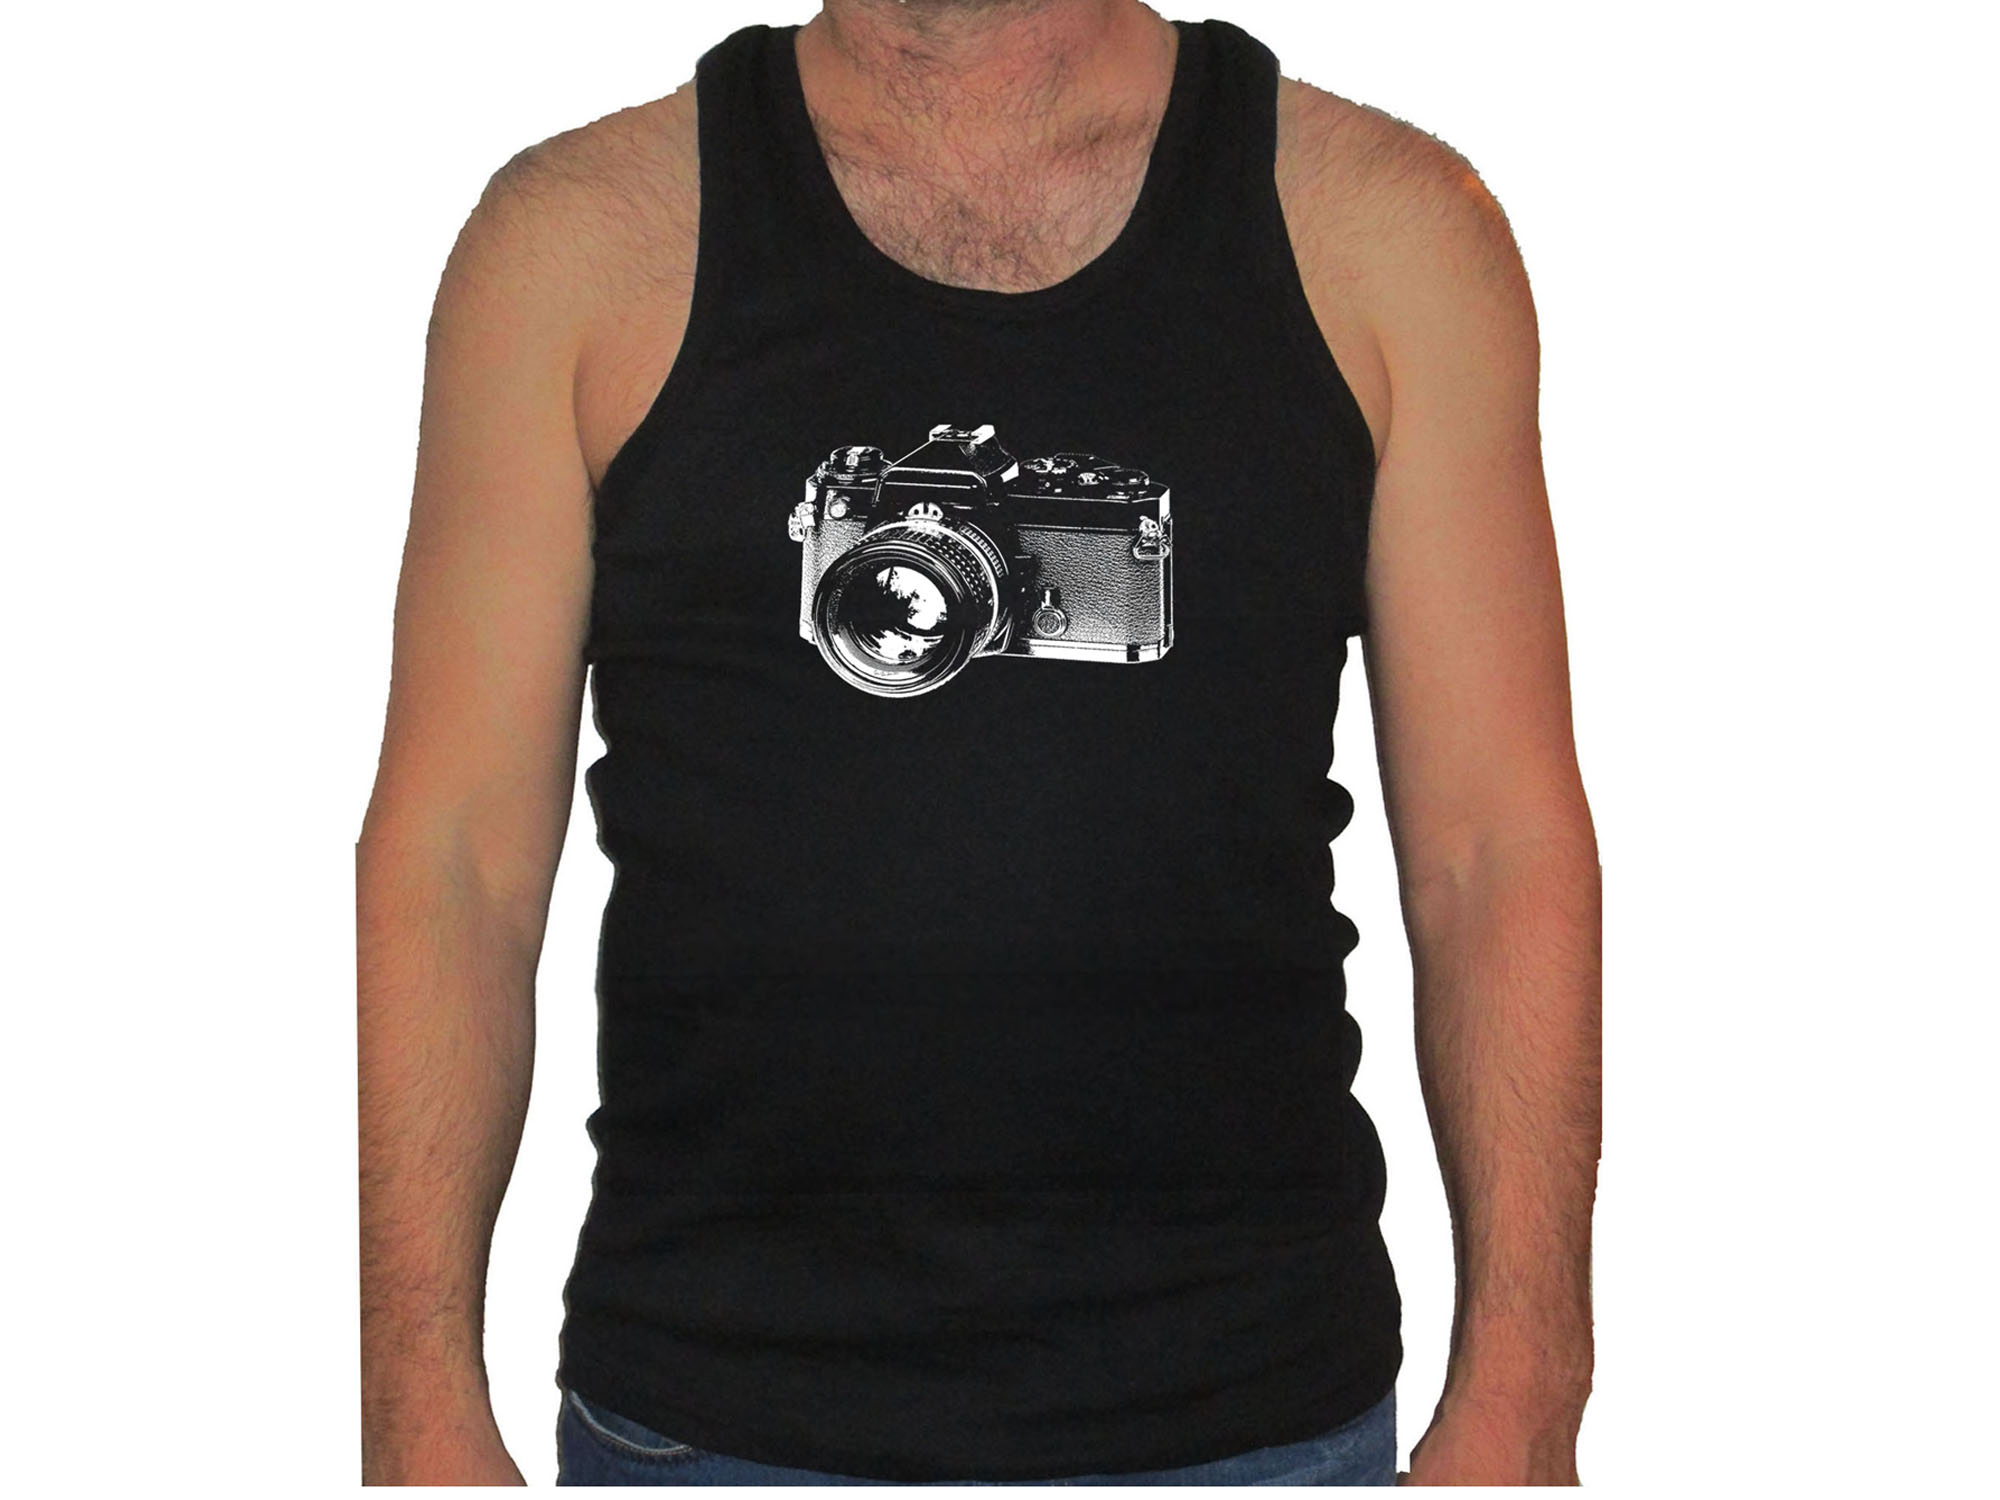 Vintage retro look old photo camera muscle sleeveless new tank top